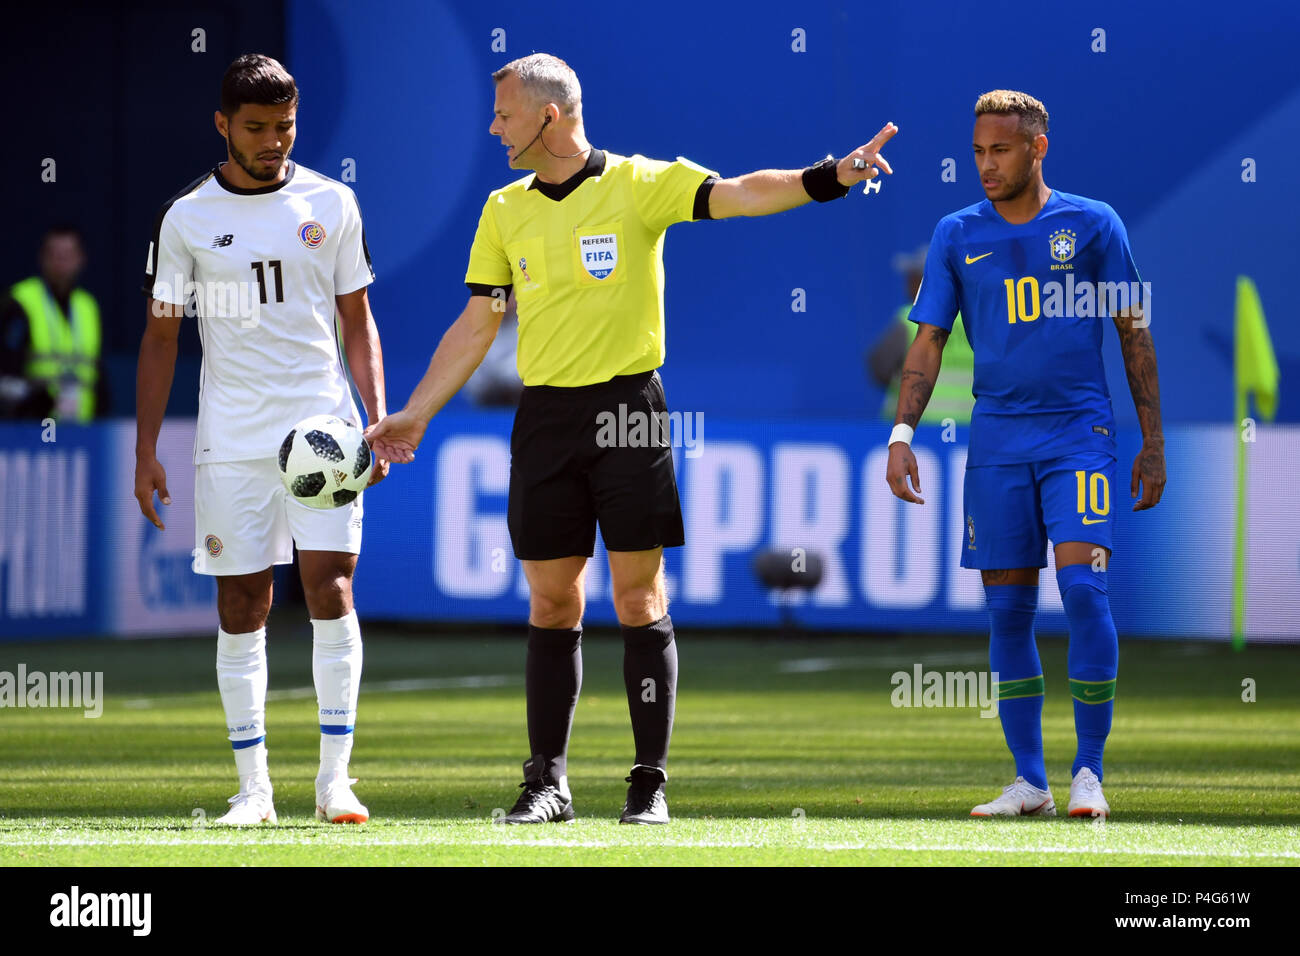 Saint Petersburg, Russia. 22nd June, 2018. Soccer: Preliminary stage, Group E, 2nd matchday: Brazil vs Costa Rica in the St. Petersburg Stadium: Match referee Sander van Roekel from the Netherlands (C) speaking to Costa Rica's Johan Venegas (L), while Brazil's Neymar stands nearby. Credit: Federico Gambarini/dpa/Alamy Live News Stock Photo